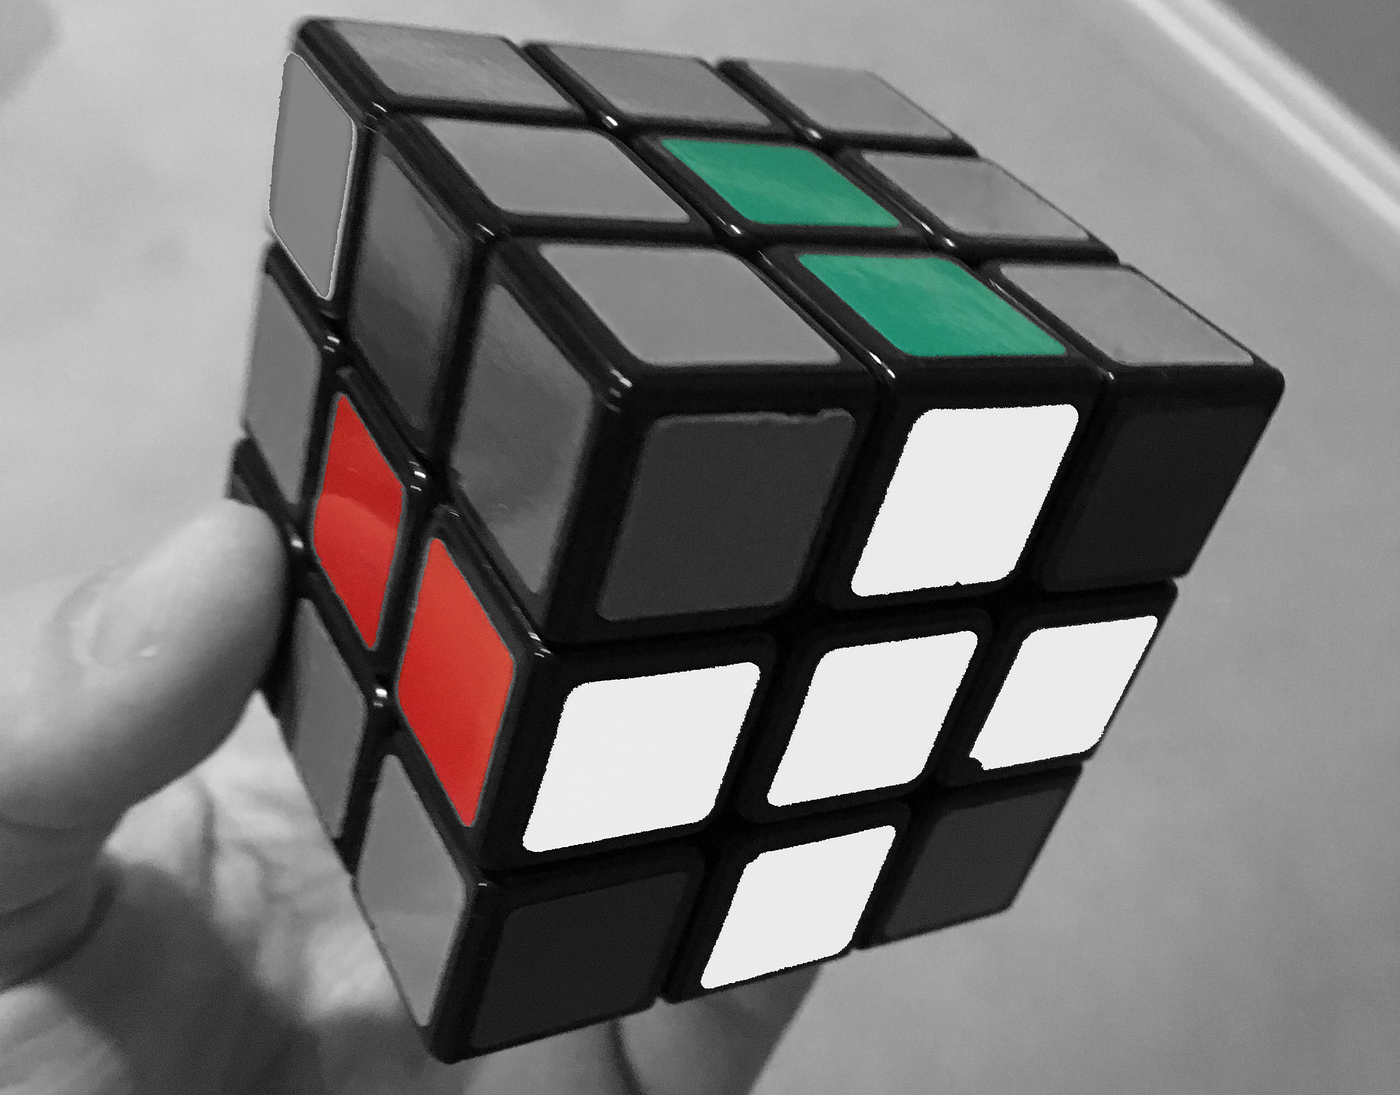 My month-long quest to solve a Rubik's Cube in under 20 seconds, by Max  Deutsch